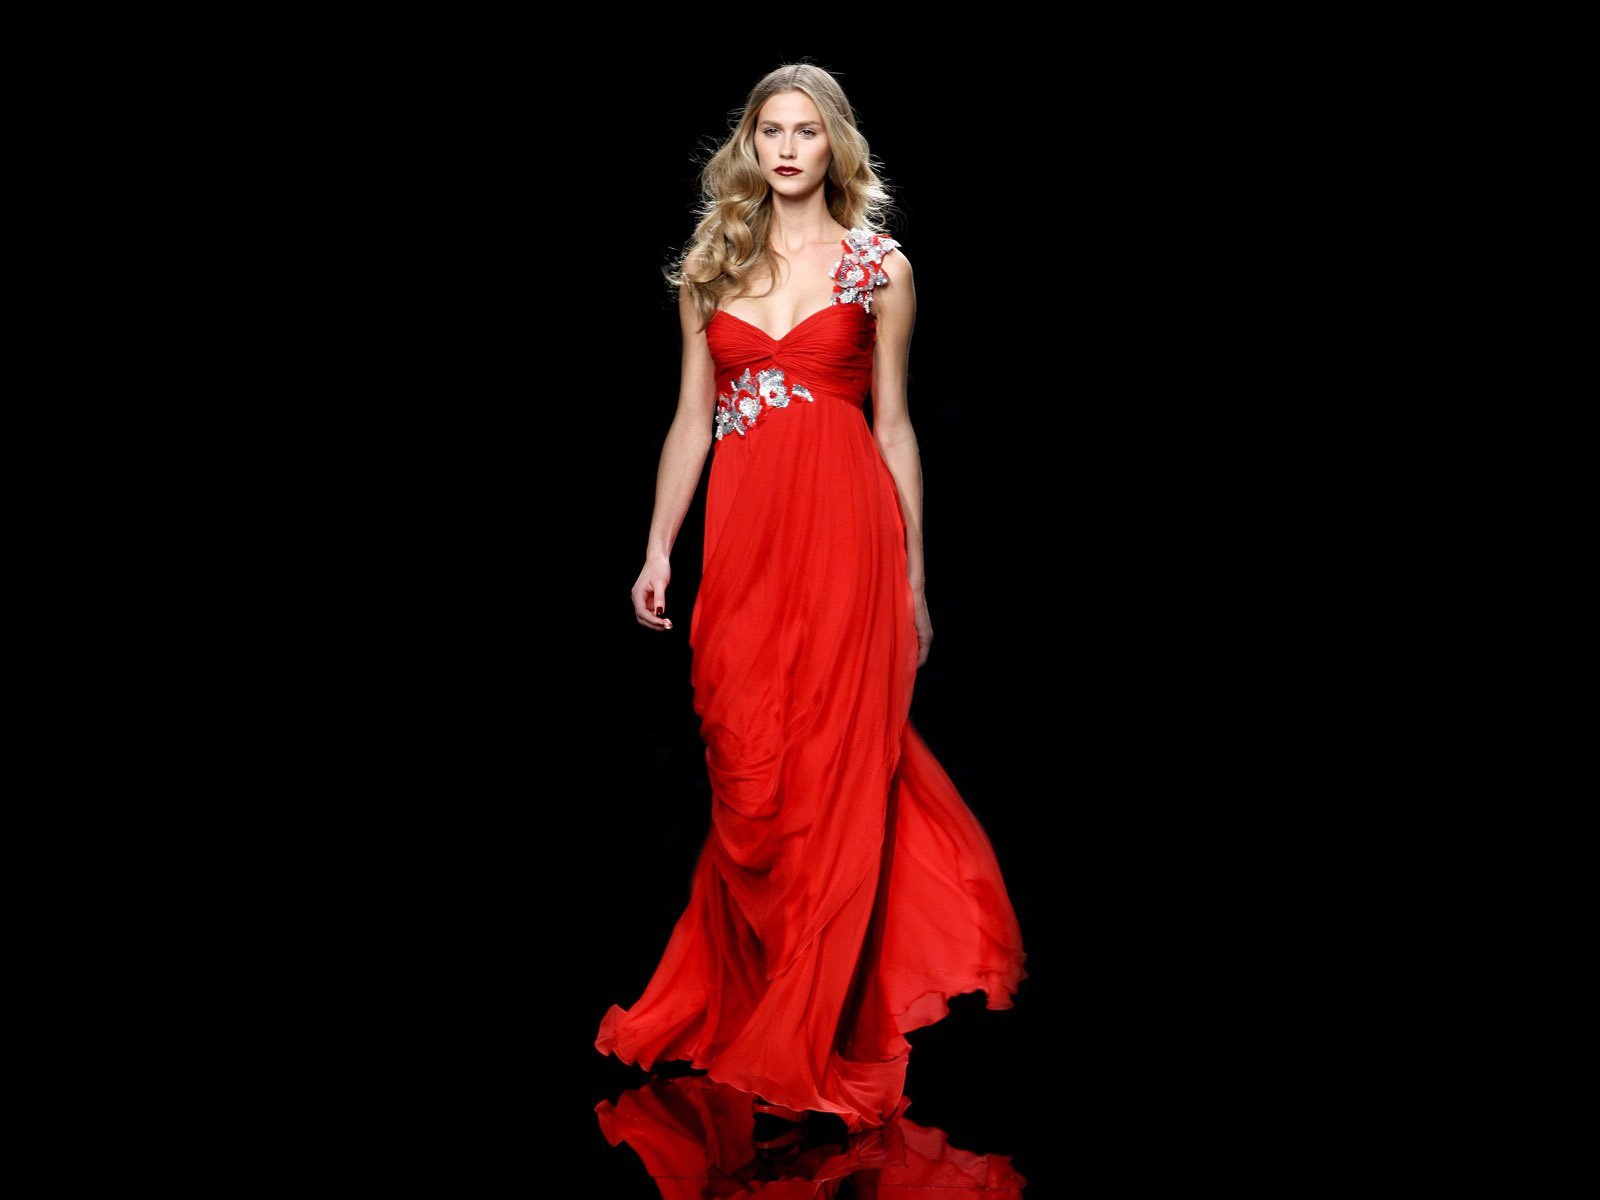 red prom gown